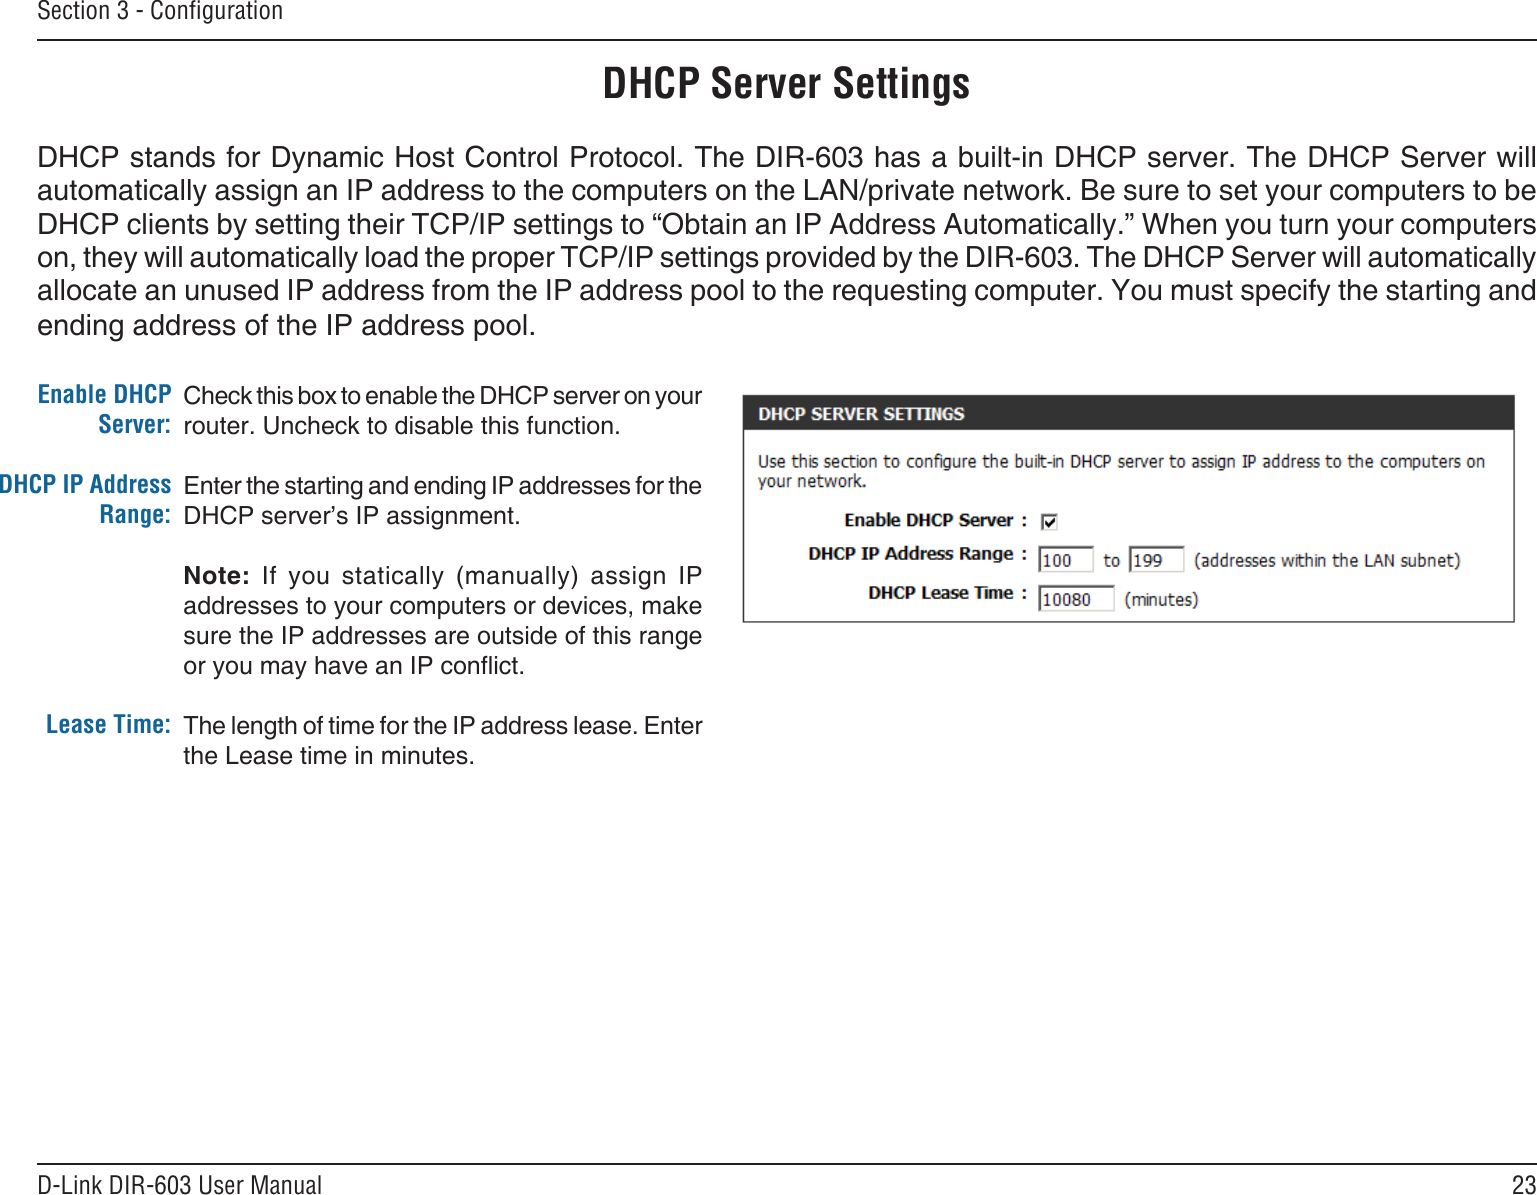 23D-Link DIR-603 User ManualSection 3 - CongurationCheck this box to enable the DHCP server on your router. Uncheck to disable this function.Enter the starting and ending IP addresses for the DHCP server’s IP assignment.Note:  If  you  statically  (manually)  assign  IP addresses to your computers or devices, make sure the IP addresses are outside of this range or you may have an IP conict. The length of time for the IP address lease. Enter the Lease time in minutes.Enable DHCP Server:DHCP IP Address Range:Lease Time:DHCP Server SettingsDHCP stands for Dynamic Host Control Protocol. The DIR-603 has a built-in DHCP server. The DHCP Server will automatically assign an IP address to the computers on the LAN/private network. Be sure to set your computers to be DHCP clients by setting their TCP/IP settings to “Obtain an IP Address Automatically.” When you turn your computers on, they will automatically load the proper TCP/IP settings provided by the DIR-603. The DHCP Server will automatically allocate an unused IP address from the IP address pool to the requesting computer. You must specify the starting and ending address of the IP address pool.